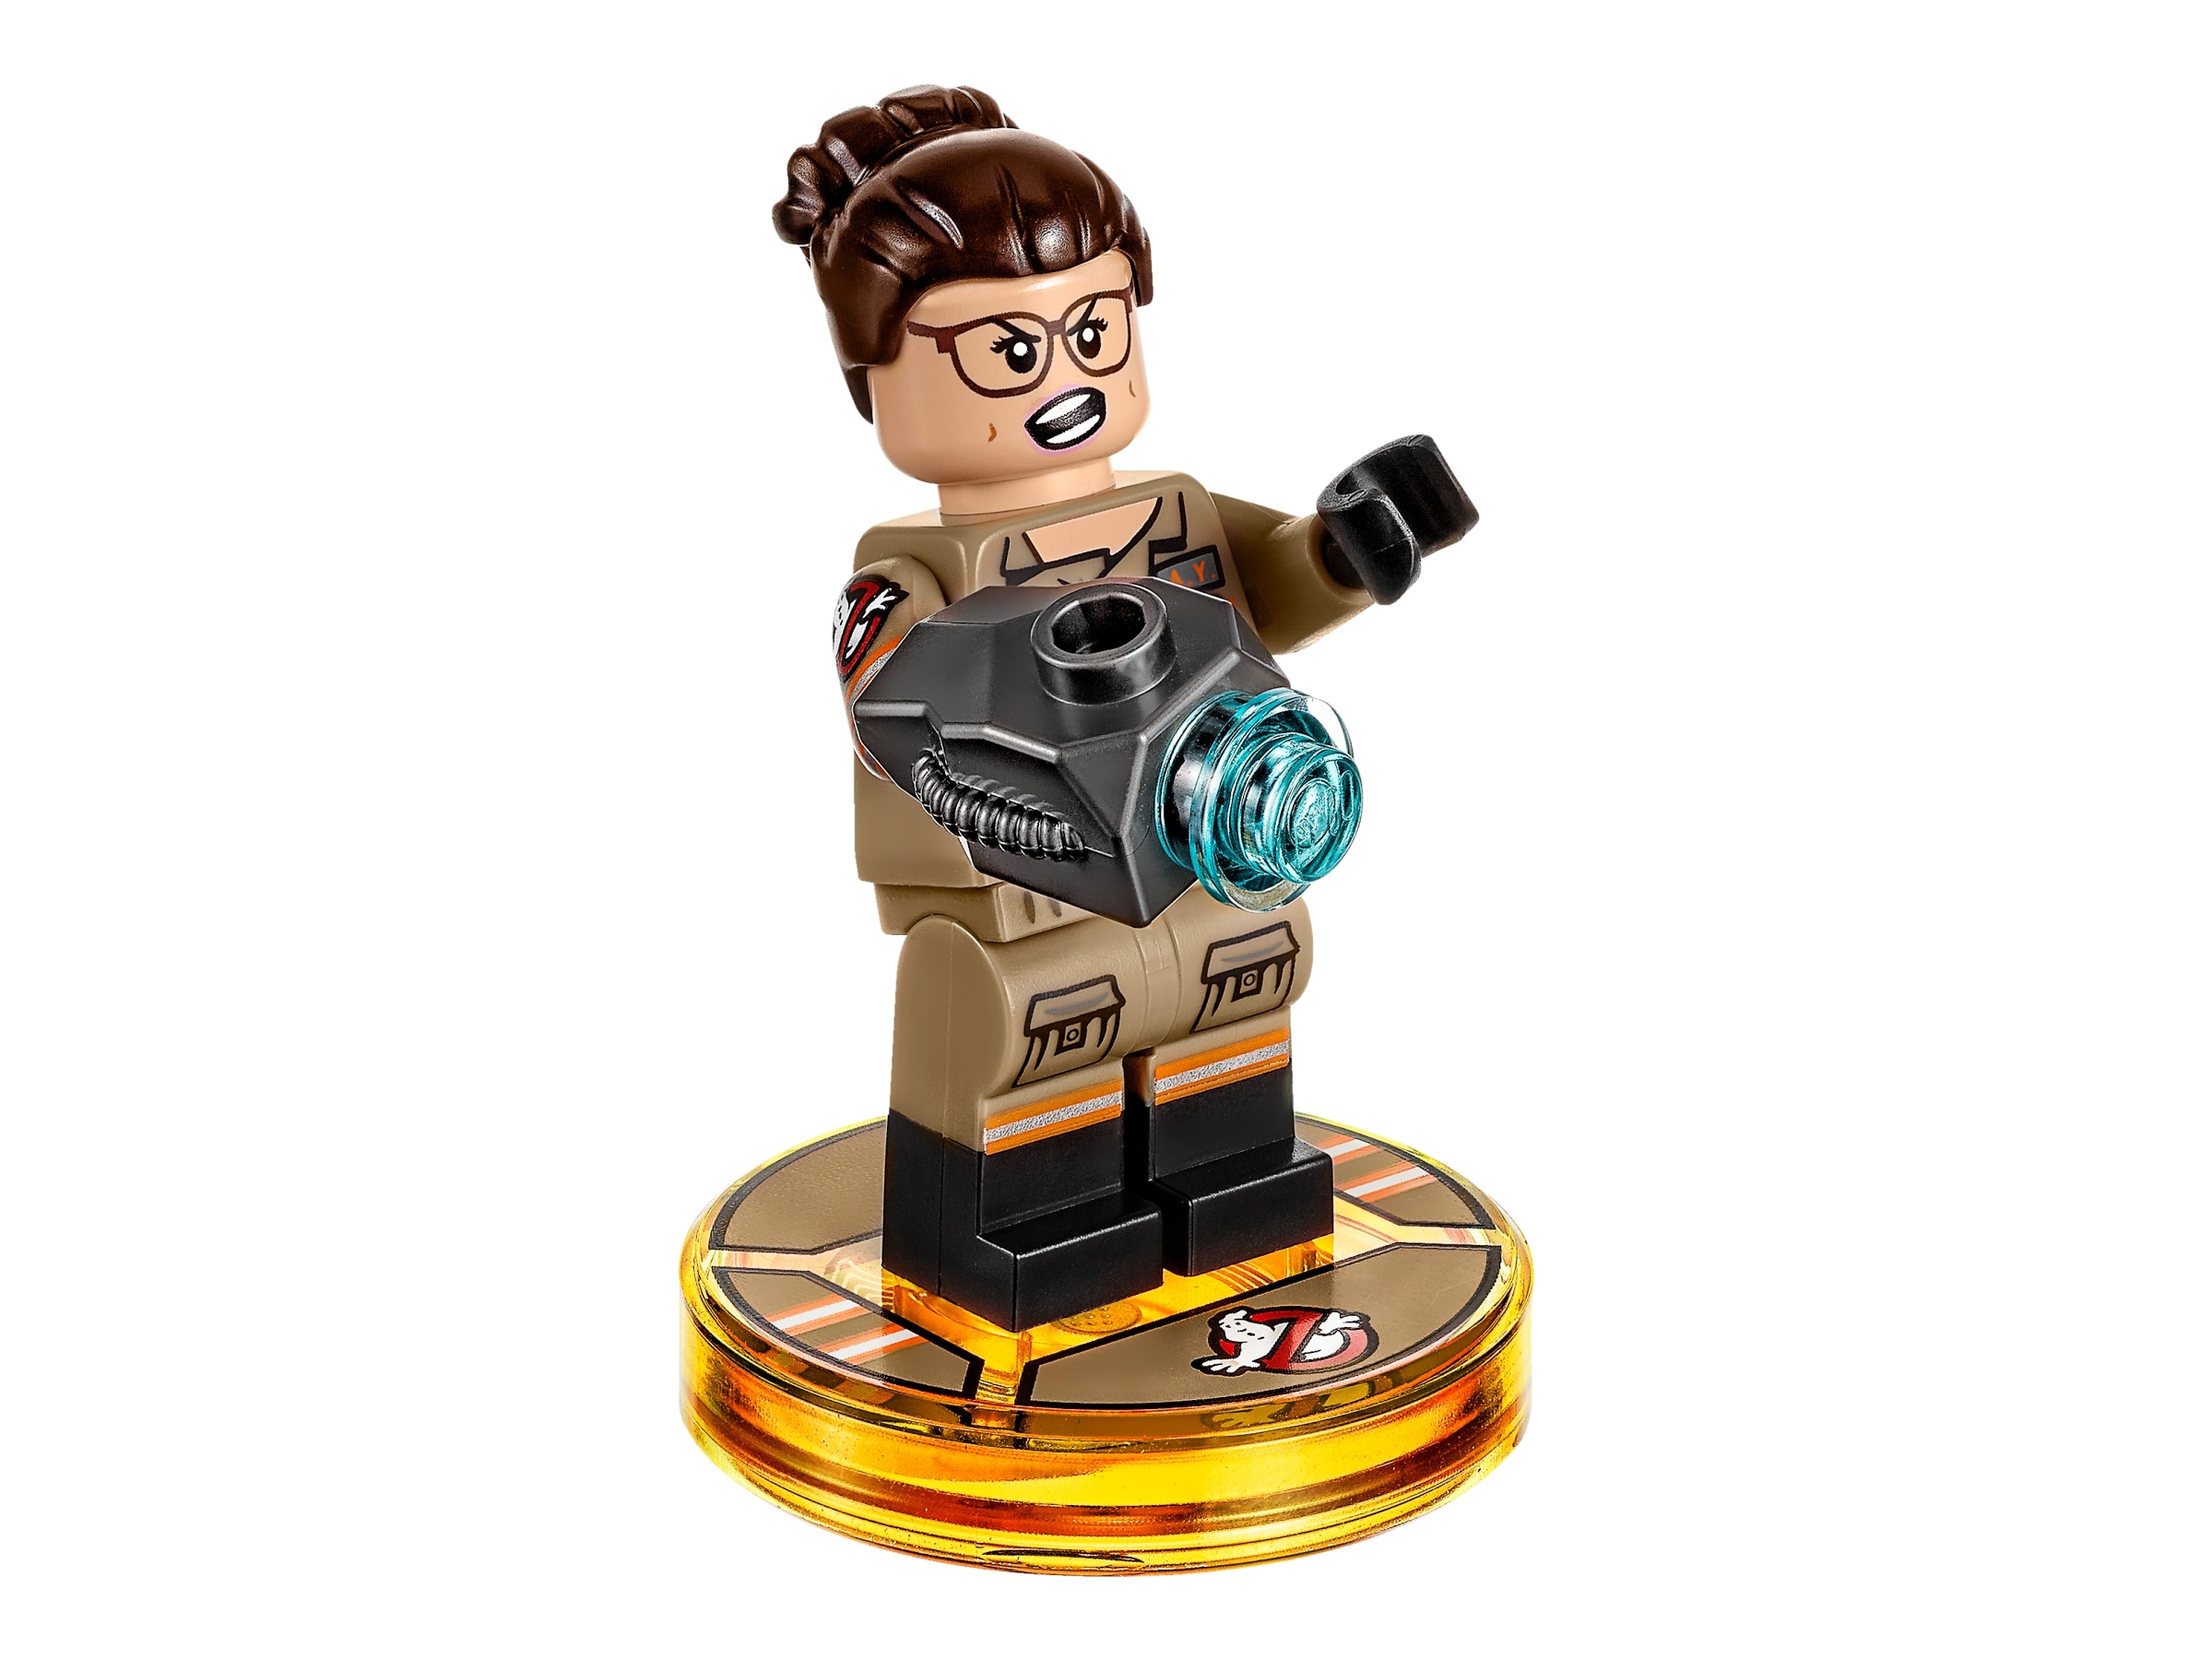 Ghostbusters™ Story Pack 71242 | DIMENSIONS™ | Buy at the Official LEGO® Shop